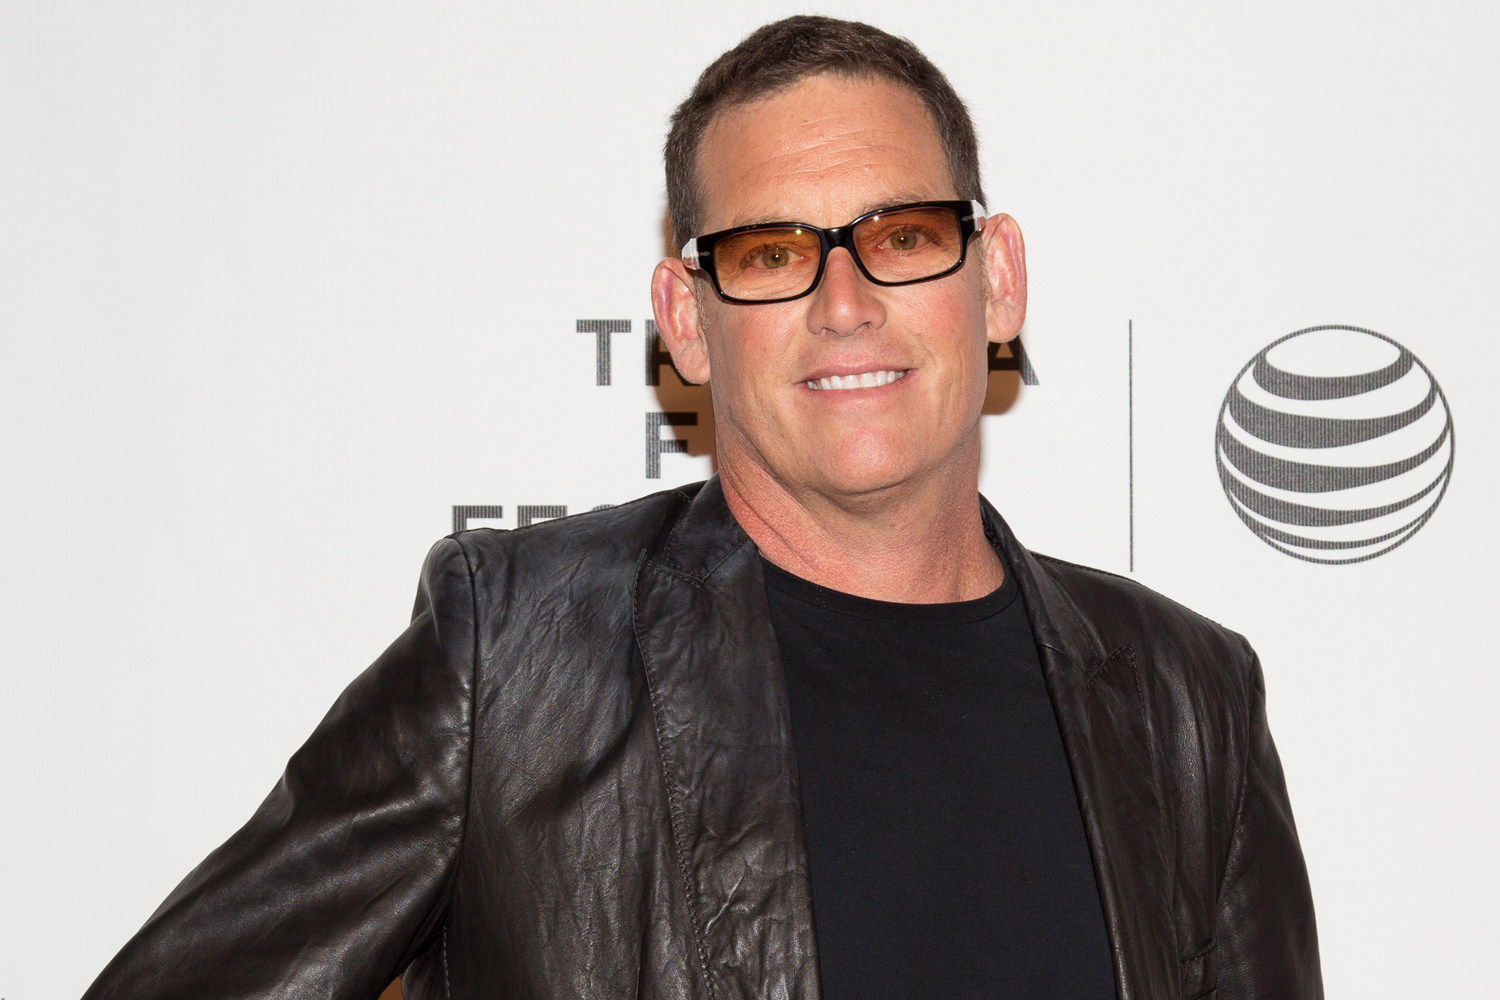 Bachelor Creator Mike Fleiss Departing the Franchise After 21 Years